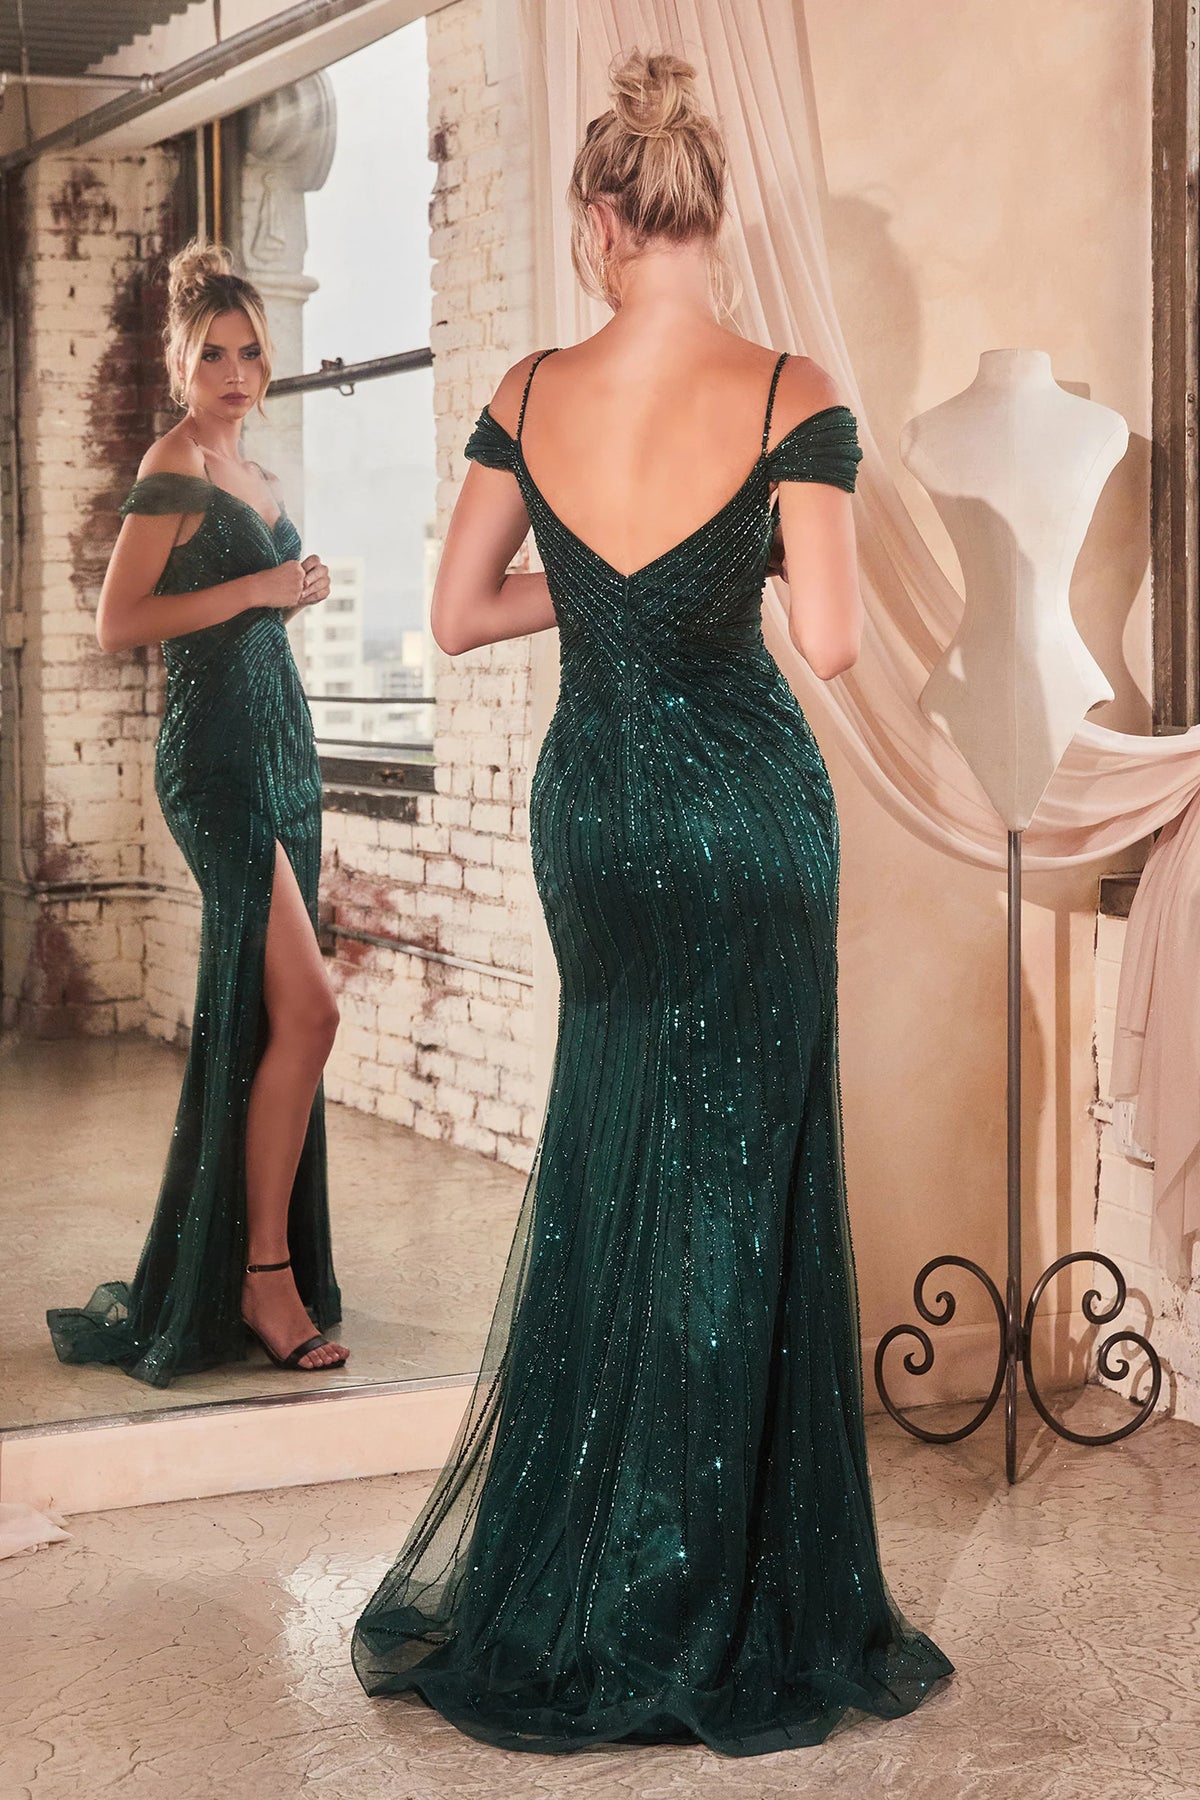 La Divine CD0219 Off the Shoulder Sequined Prom Gown - A glamorous prom gown with an off-the-shoulder design, fully beaded & sequined in a linear pattern, featuring a leg slit and sweetheart neckline for a dazzling entrance. The model is wearing the dress in emerald.  Back view of the dress.